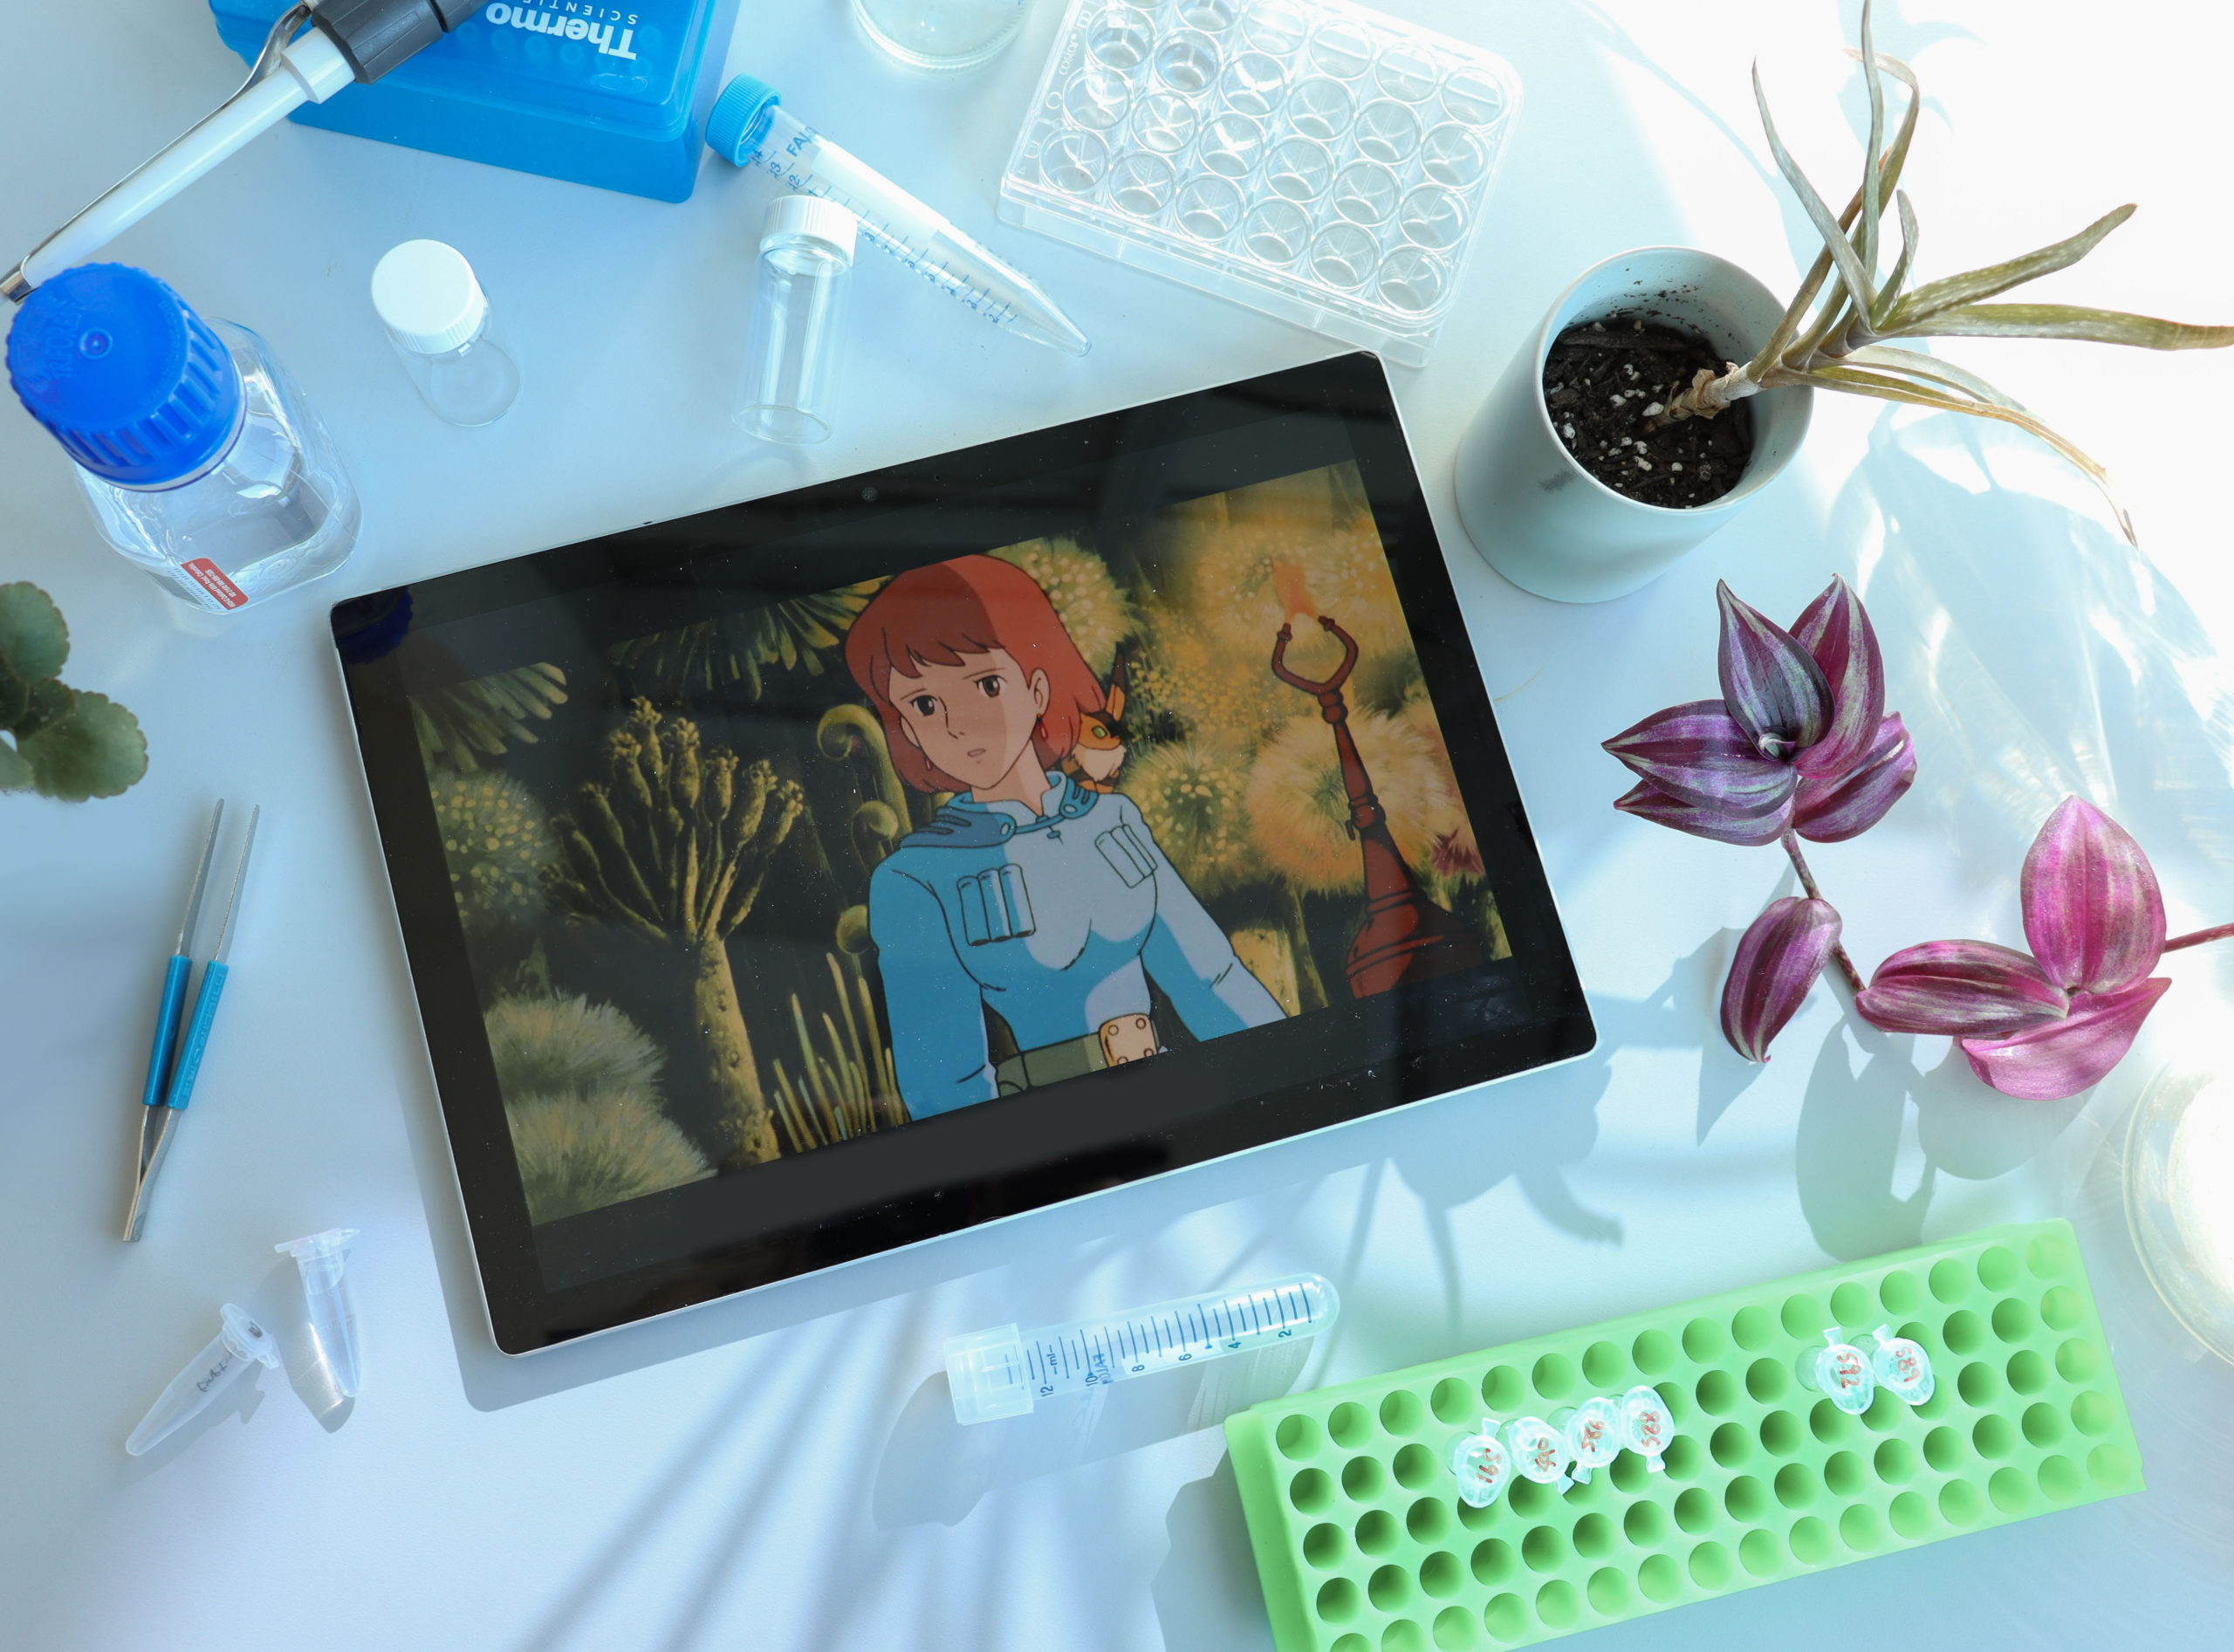 Photo of tablet with Nausicaa on screen surrounded by various science tools and plants